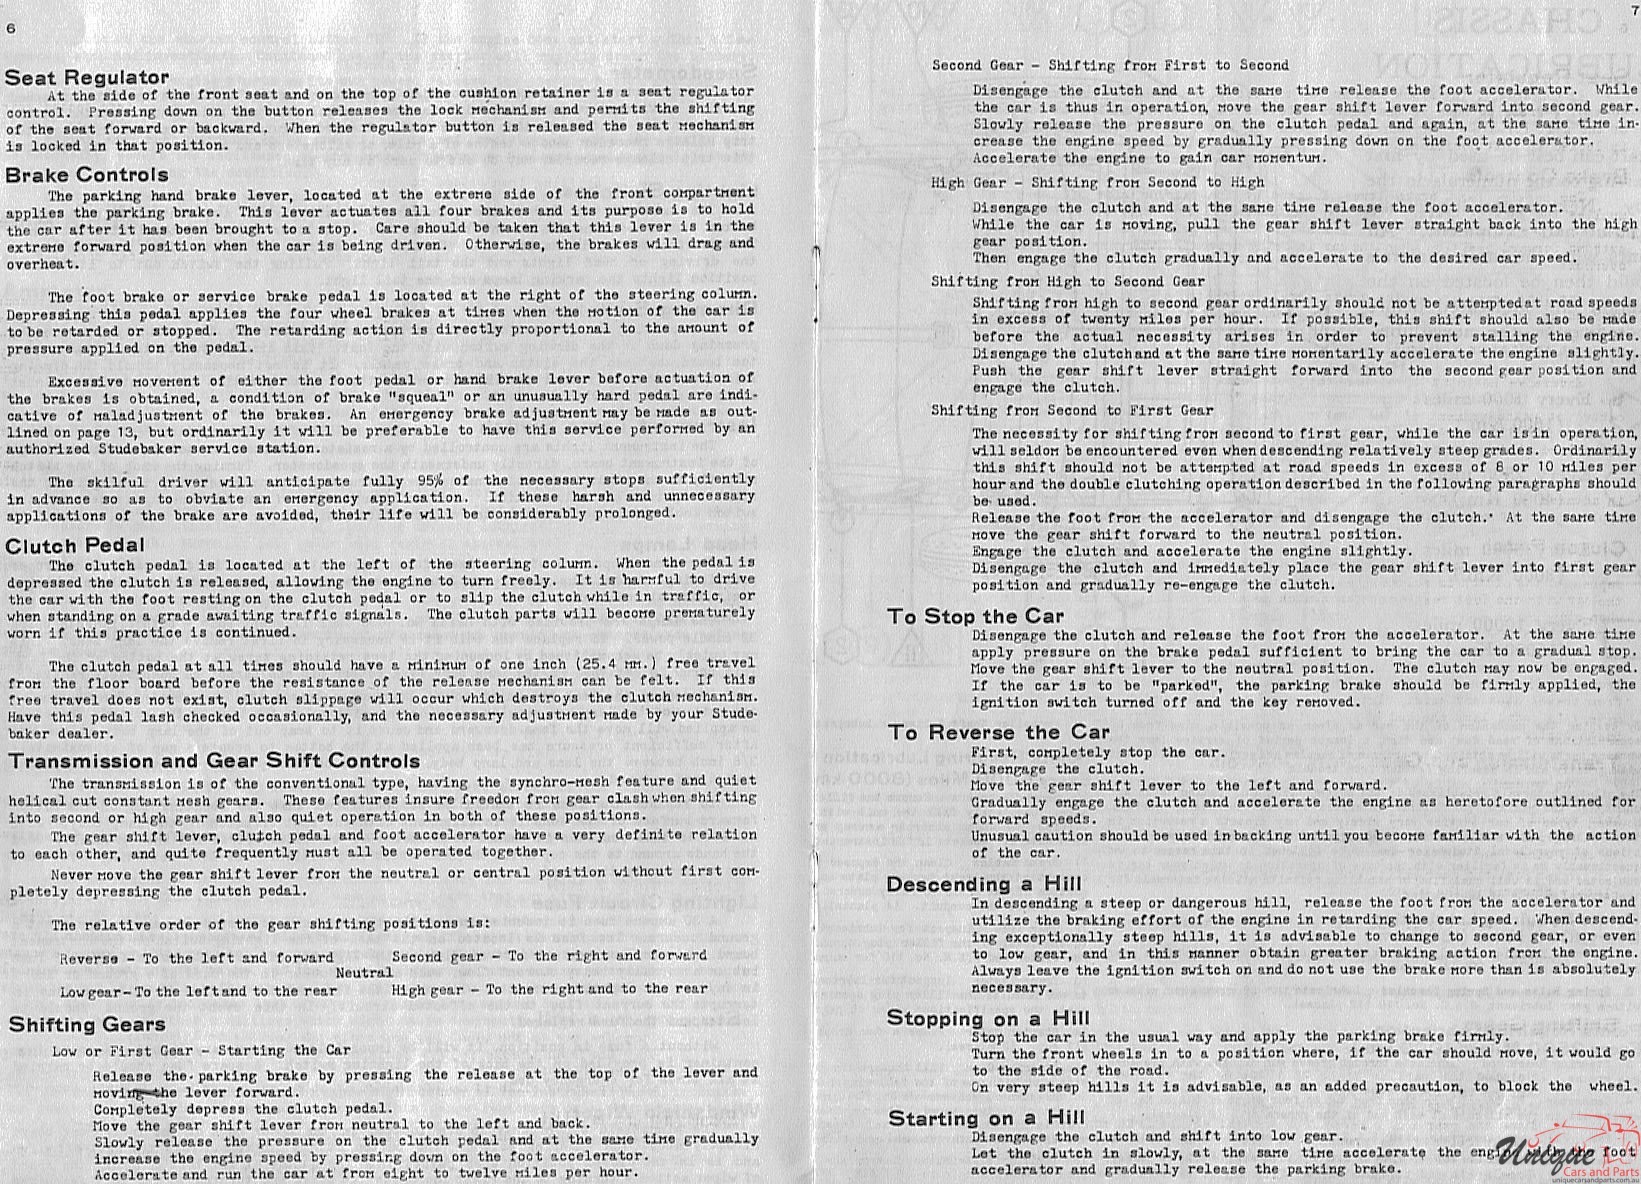 1934 Studebaker Dictator Owners Manual Page 3